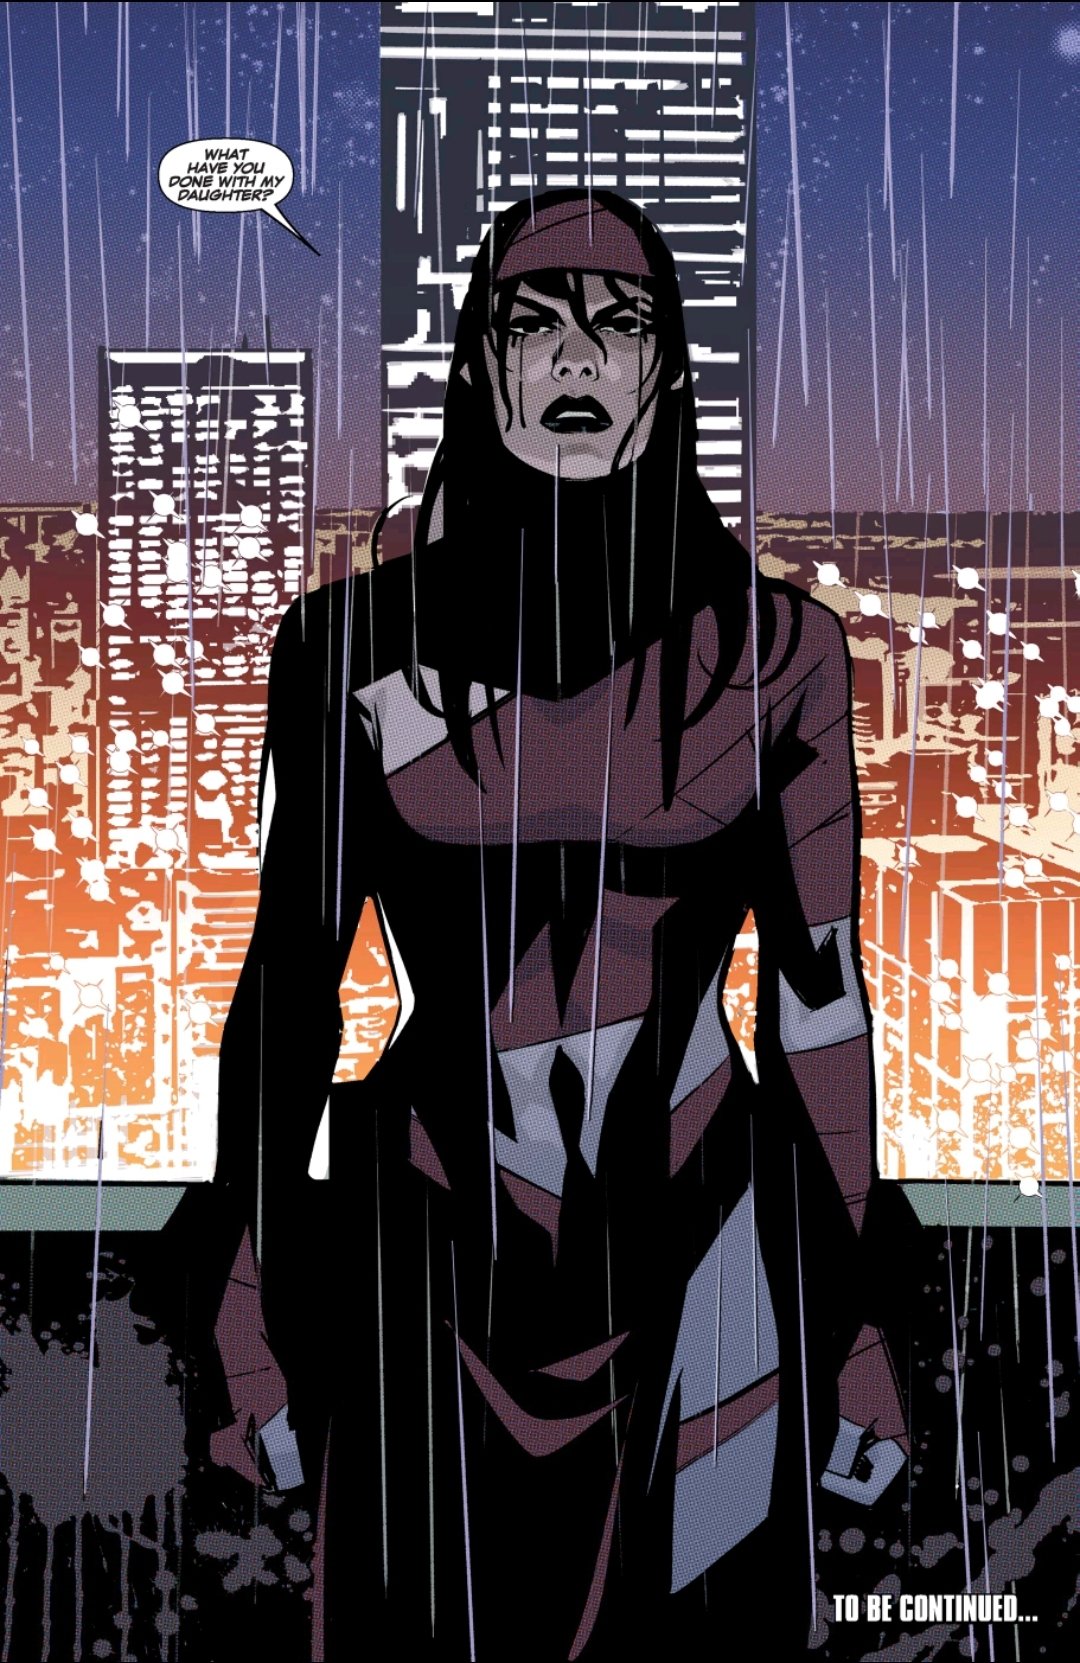 Elektra in the rain asking about her missing daughter